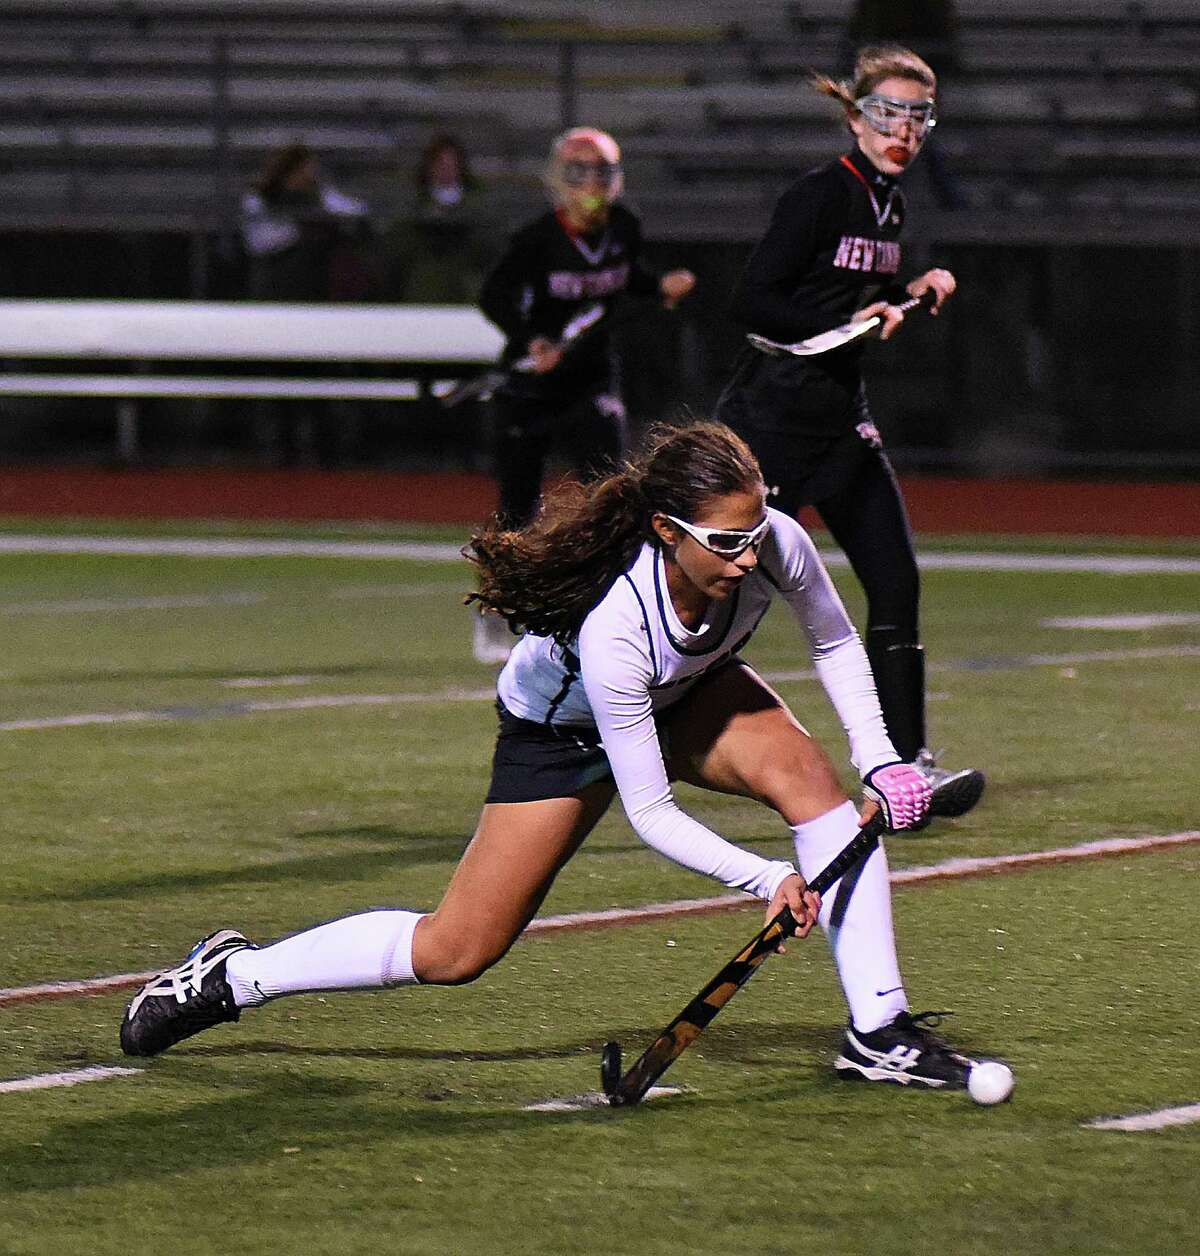 Norwalk's Jacqueline Mirabile, bottom, looks to push the ball into the circle as a pair of New Canaan defenders look on during the second half of Friday night's FCIAC field hockey quarterfinals at Testa Field in Norwalk. The host Bears won the game, 2-1.